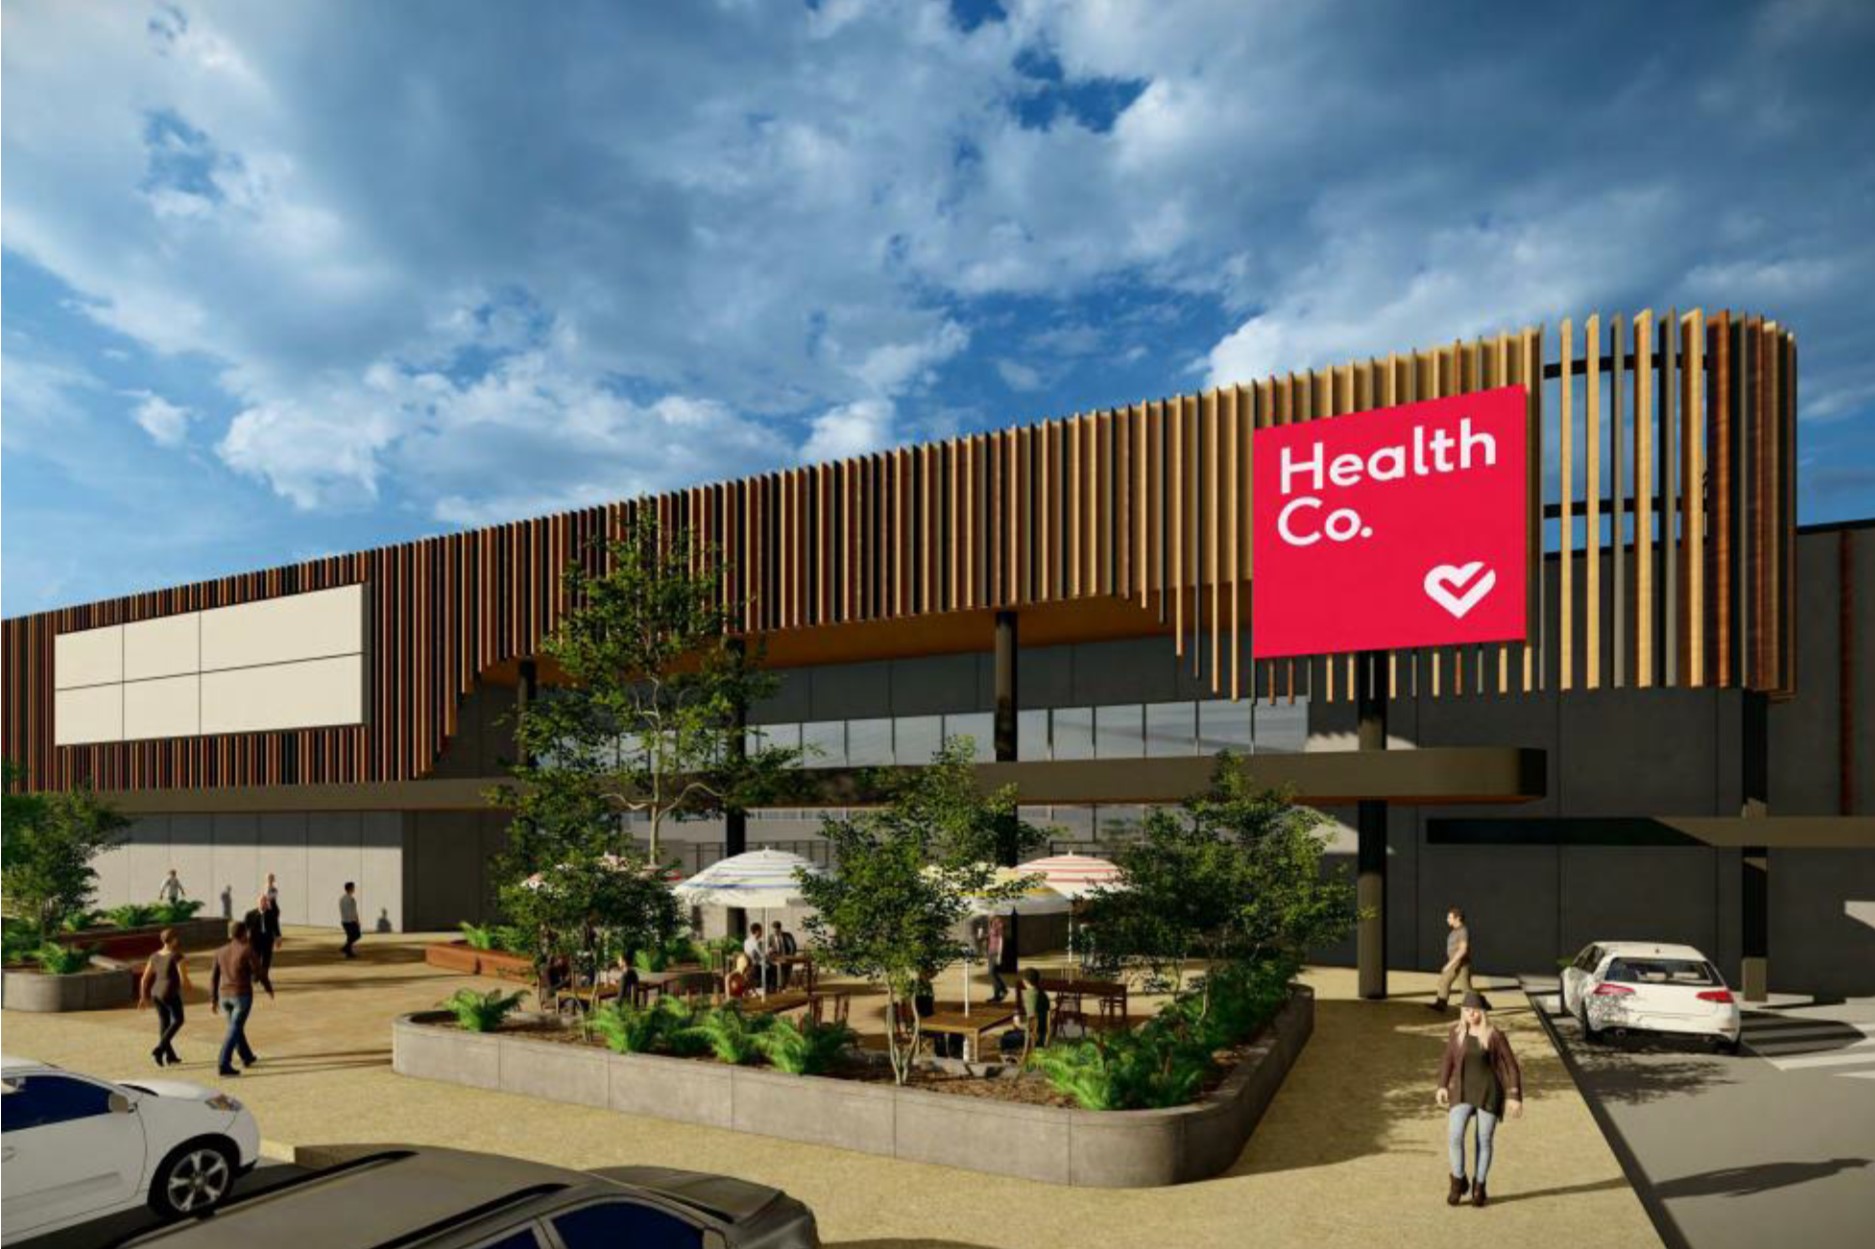 artist impression of a building clad in timber with a sign that says Health Co